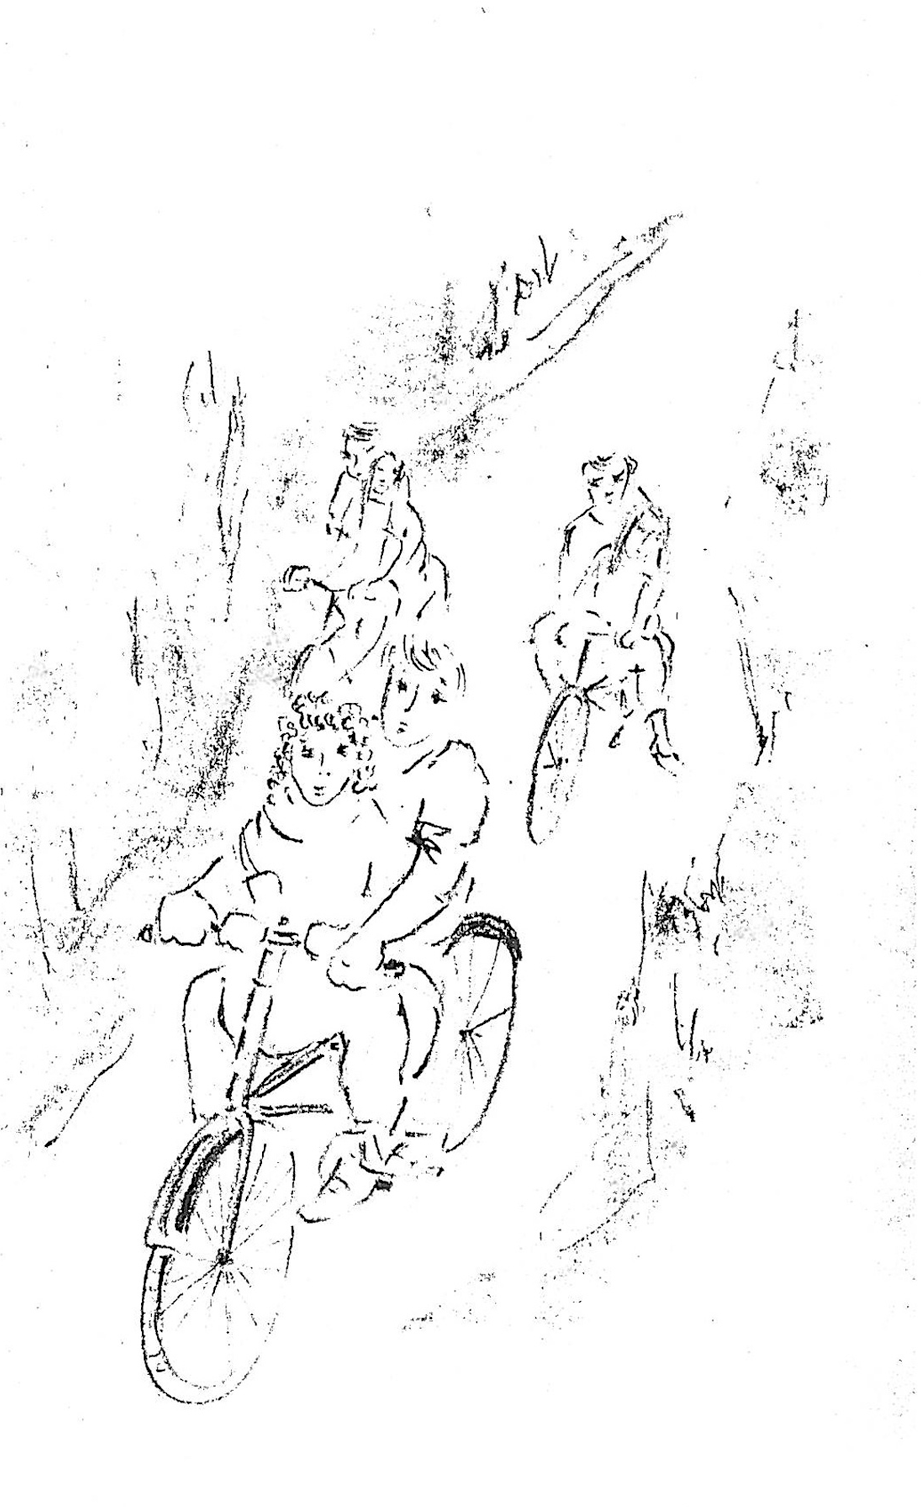 Drawing of people on bicycles. 